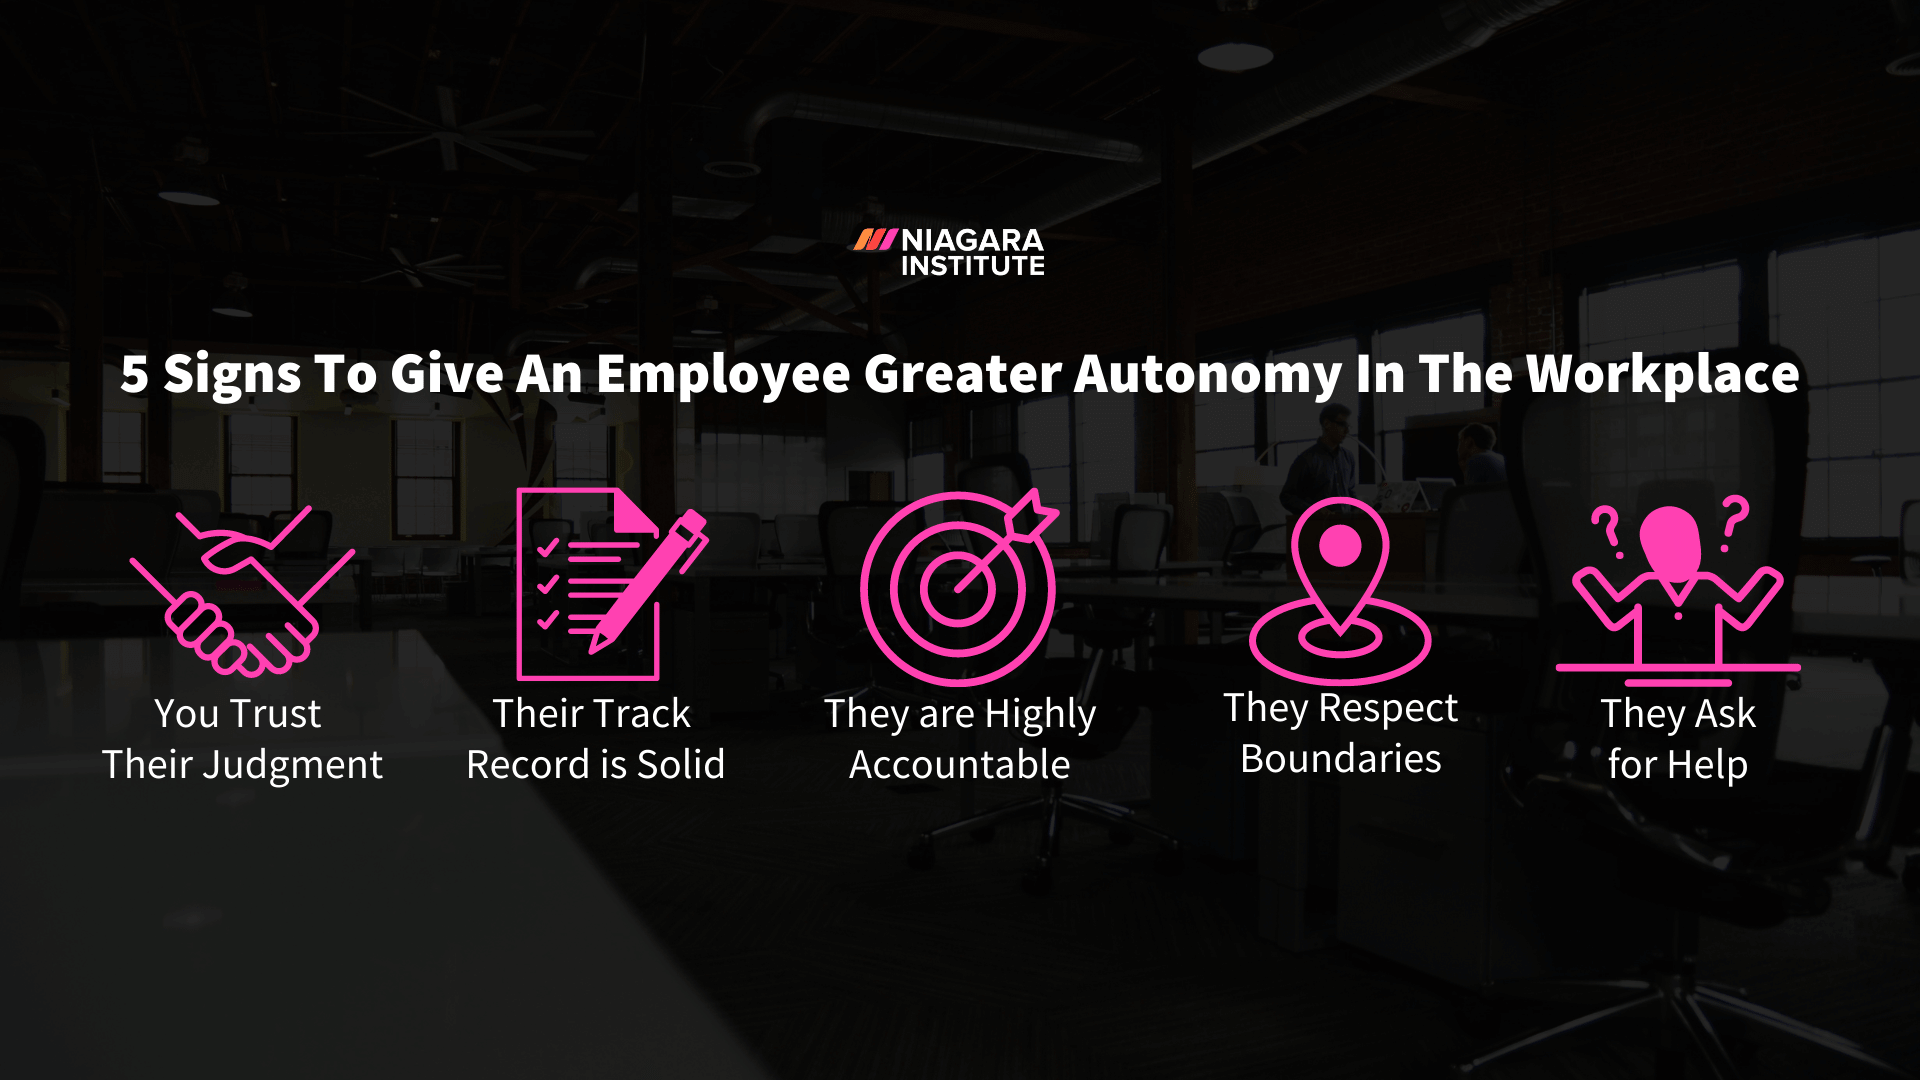 5 Signs to Give Greater Autonomy in the Workplace - Niagara Institute